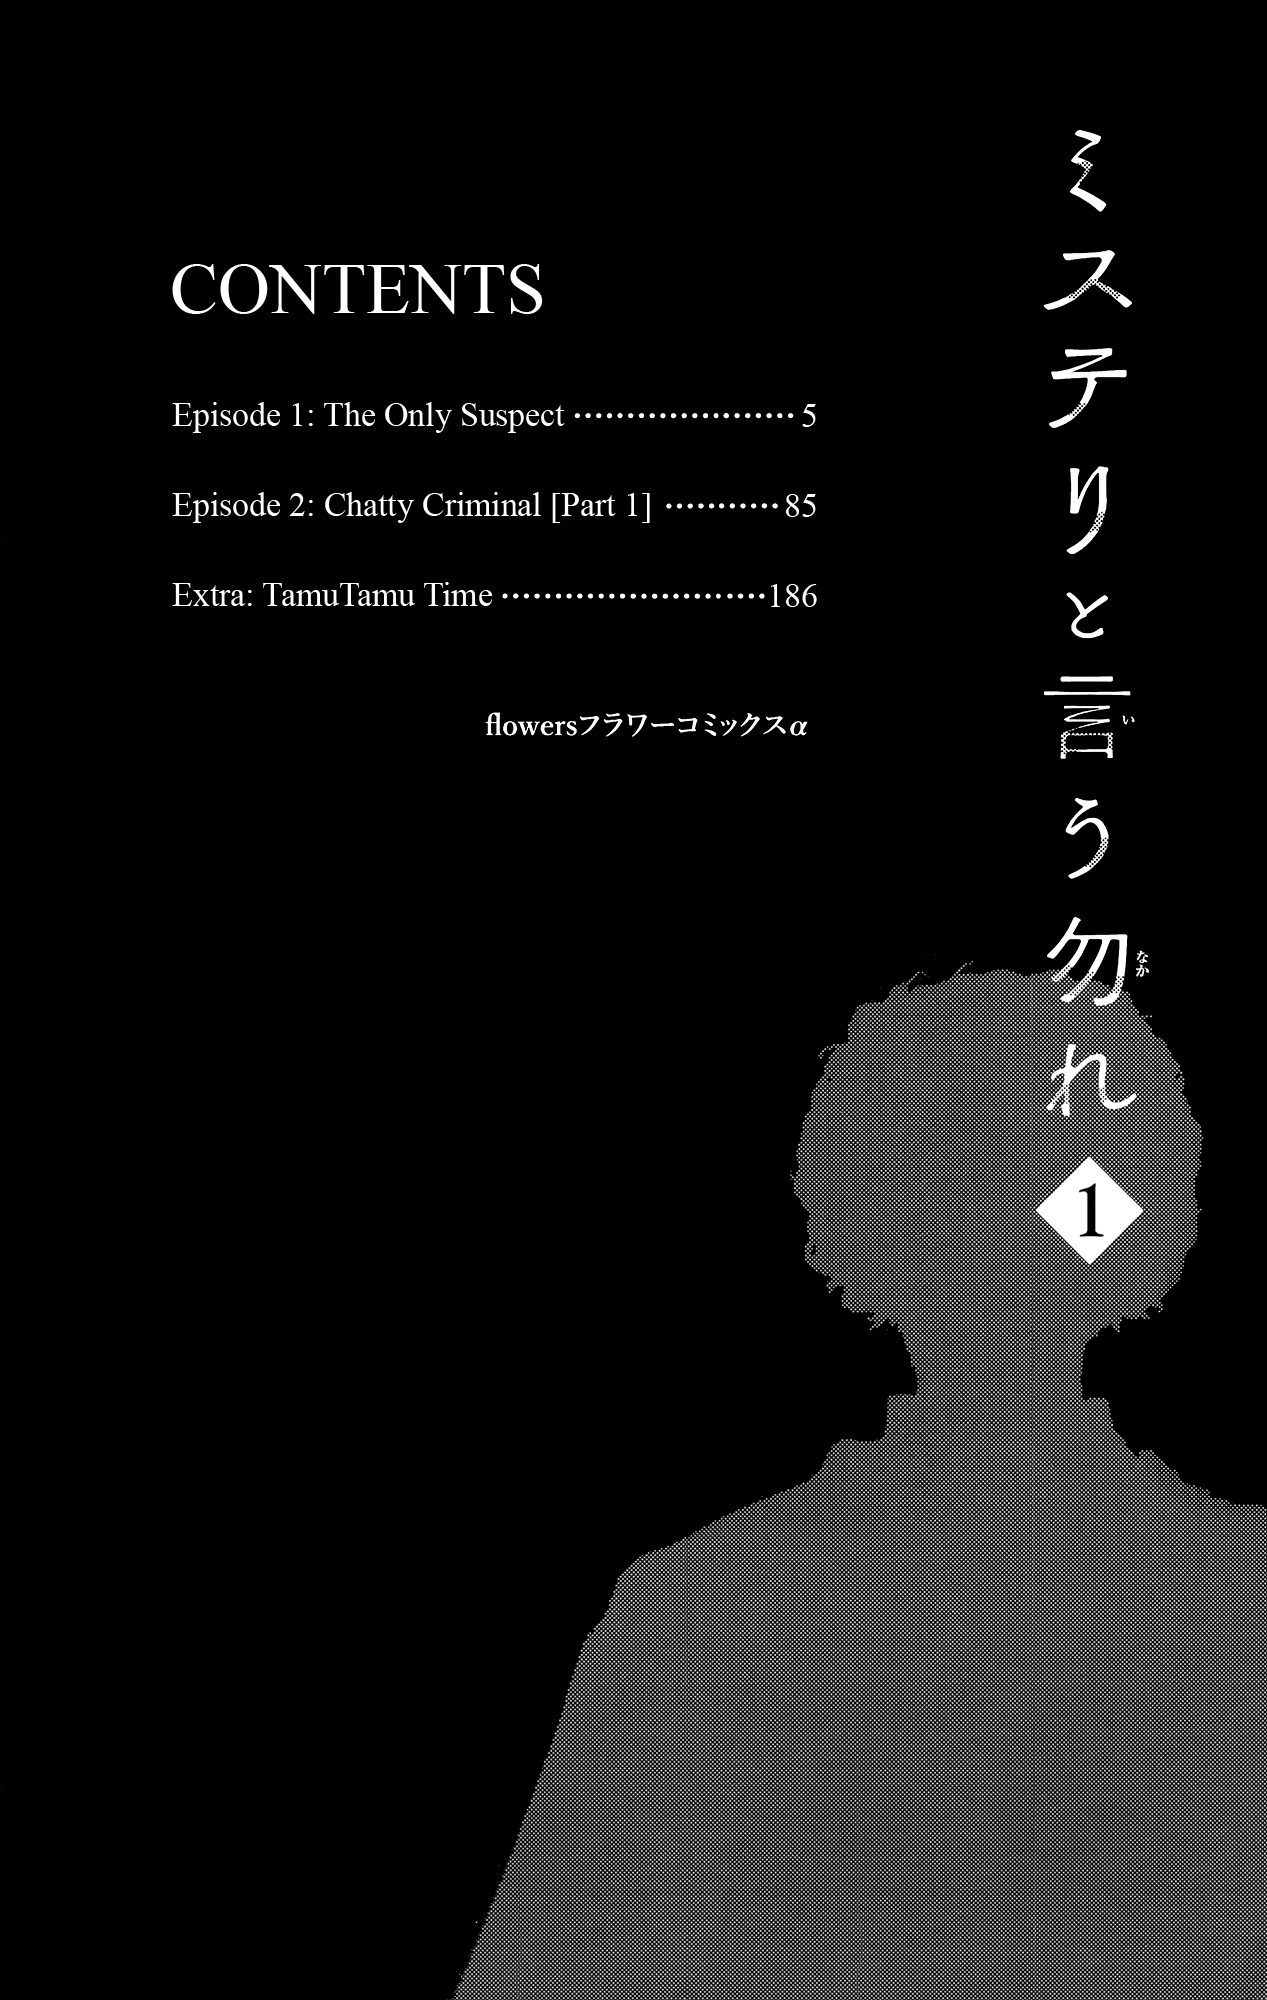 Mystery to Iunakare Vol. 1 Ch. 1 The Only Suspect